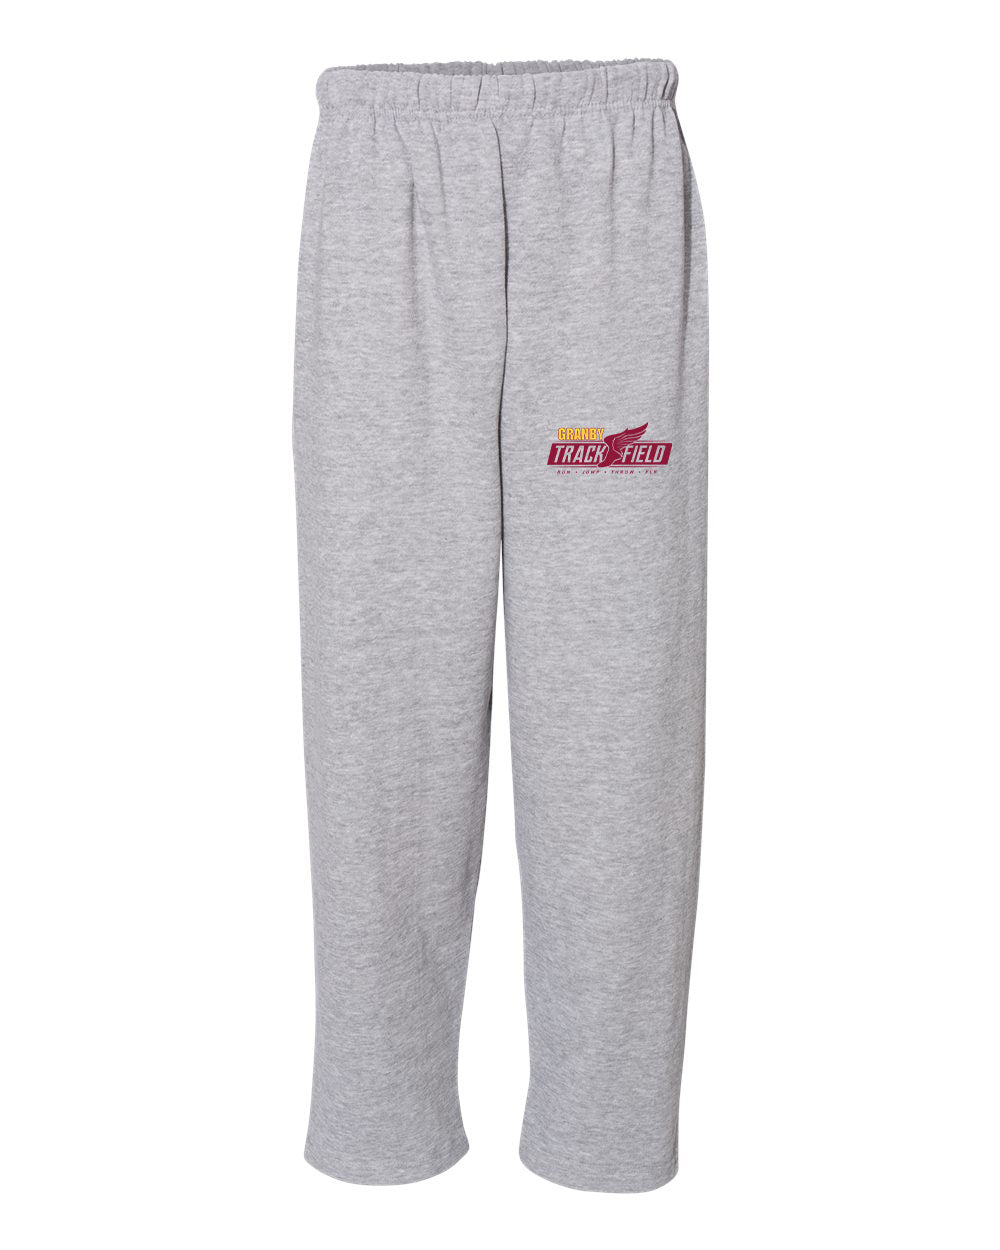 Granby High T&F Adult Open Bottom Sweatpants - 5577 (color options available)